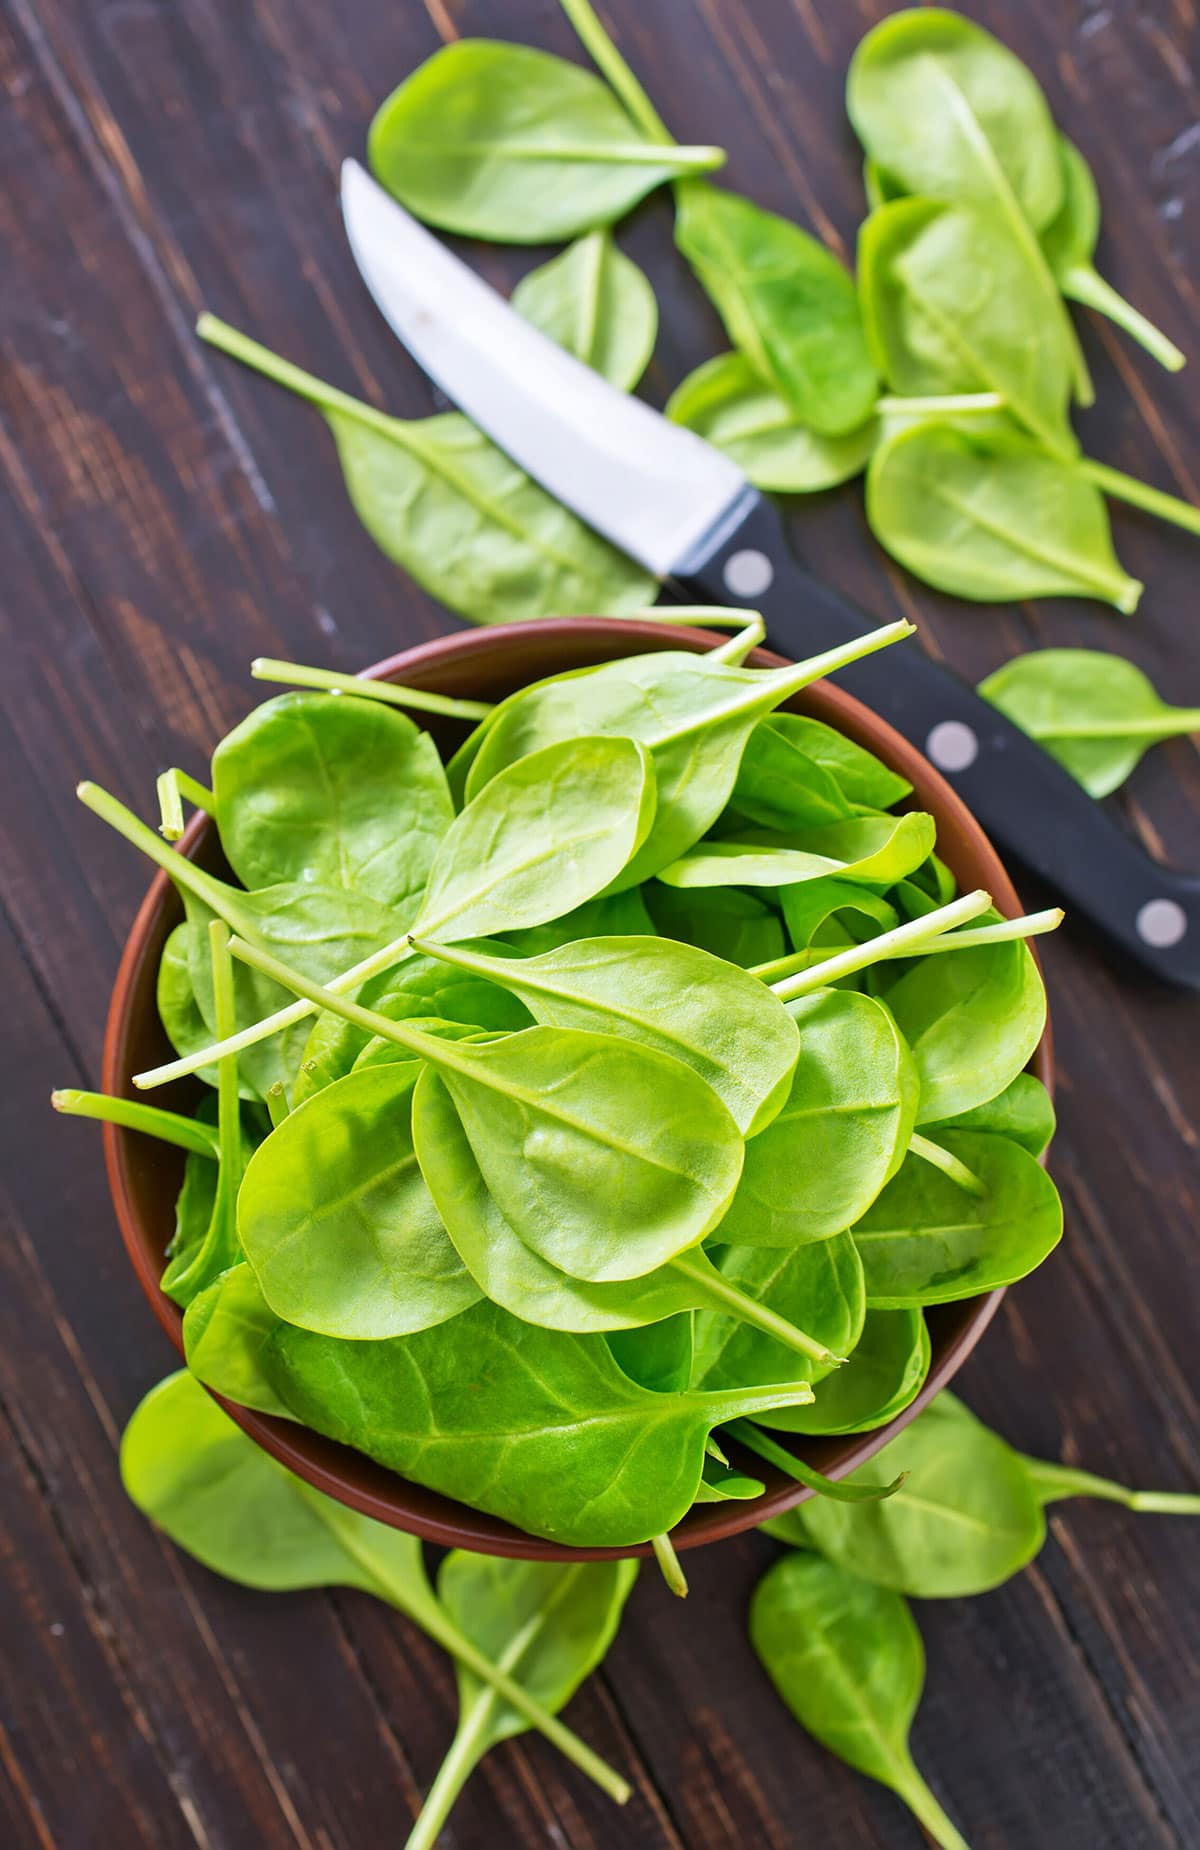  Is Spinach high in fiber?